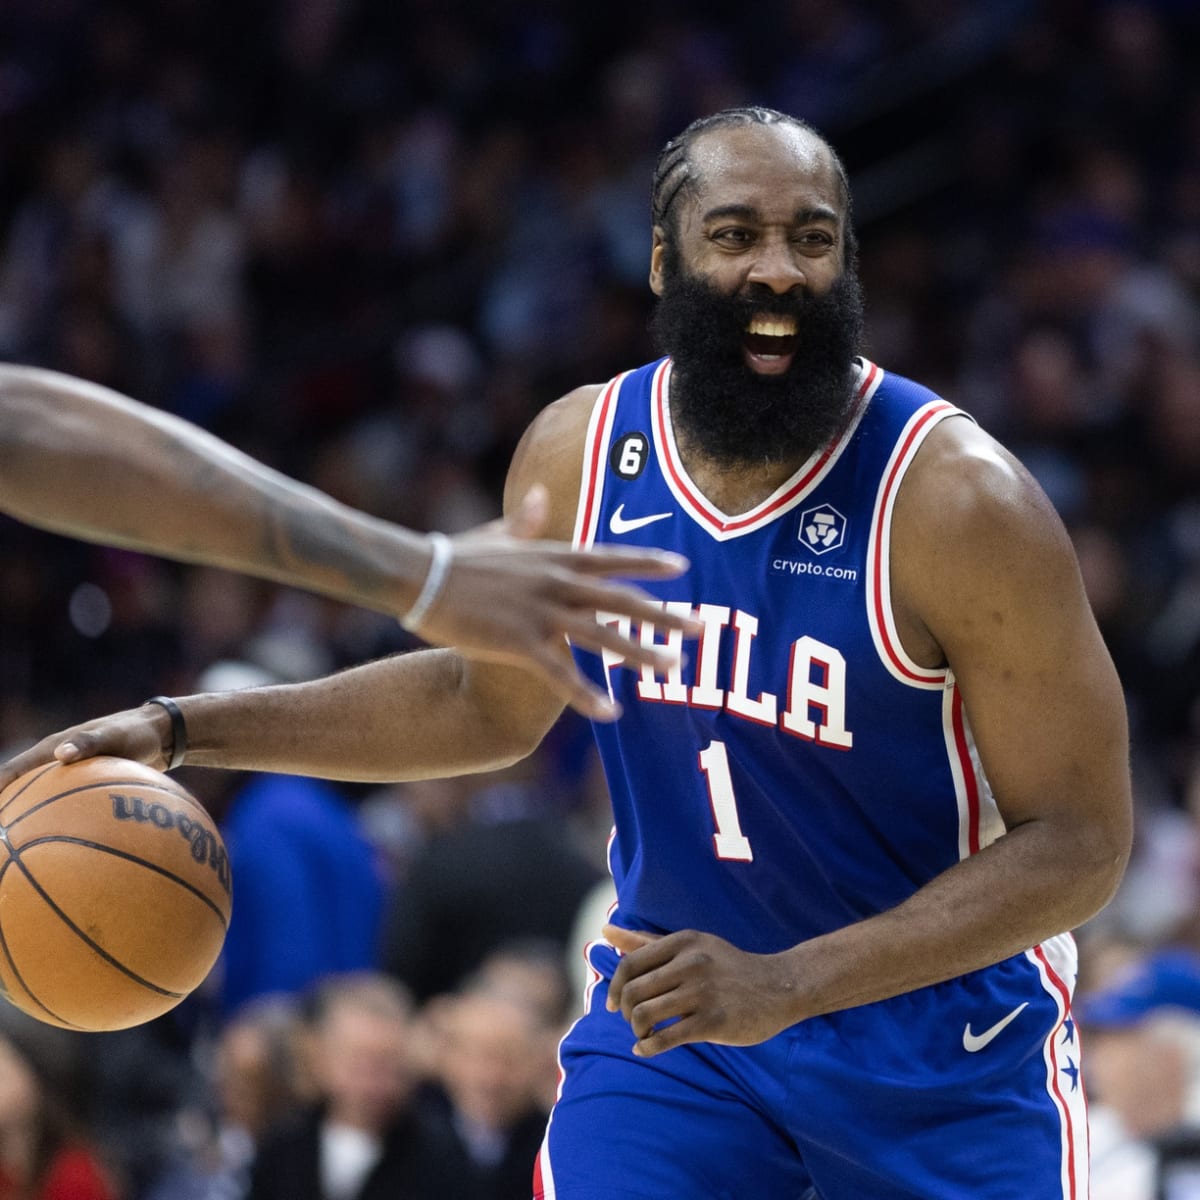 NBA free agency: Why the Sixers have flexibility to remake their